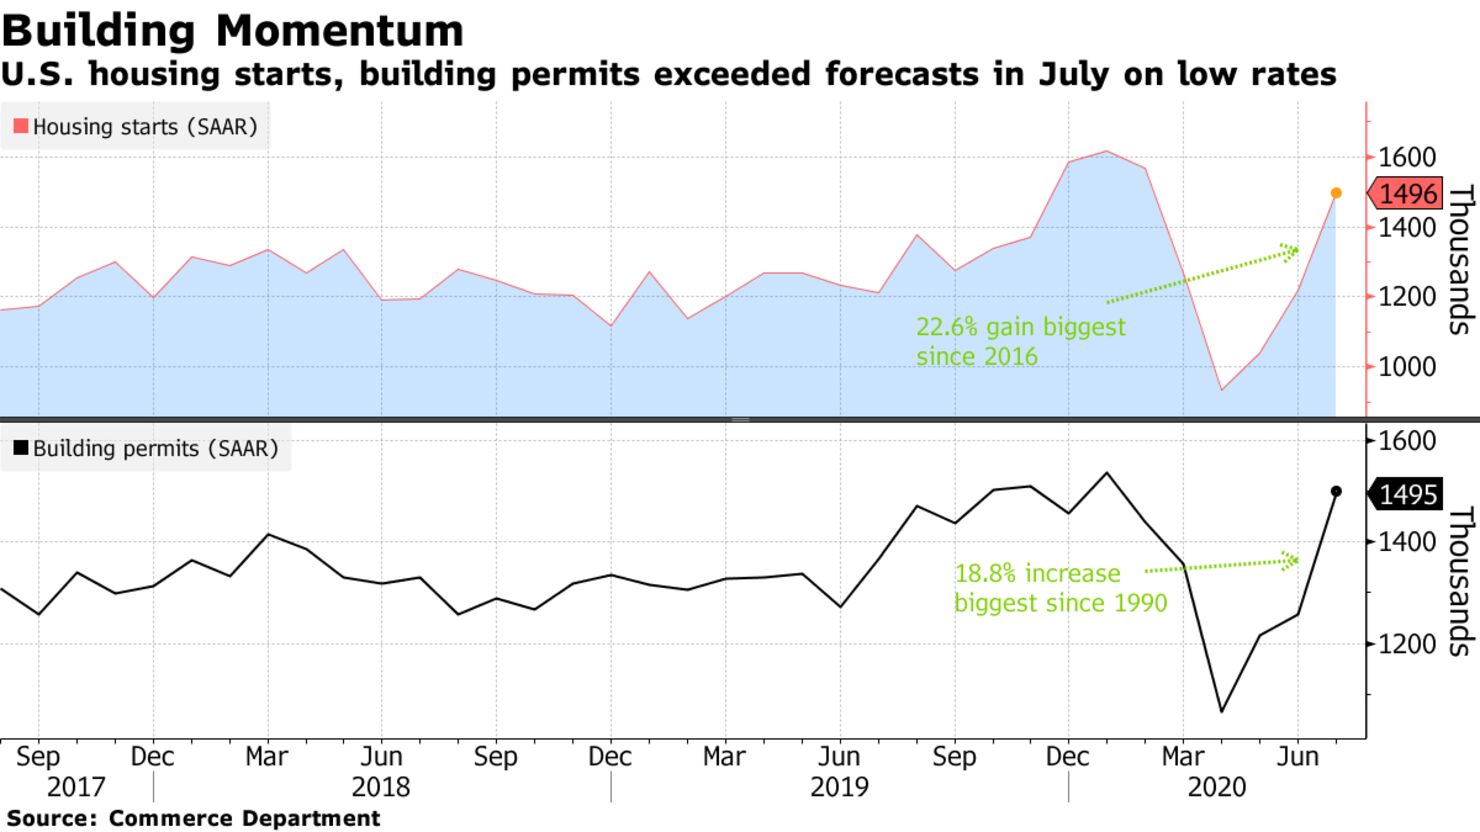 U.S. housing starts, building permits exceeded forecasts in July on low rates